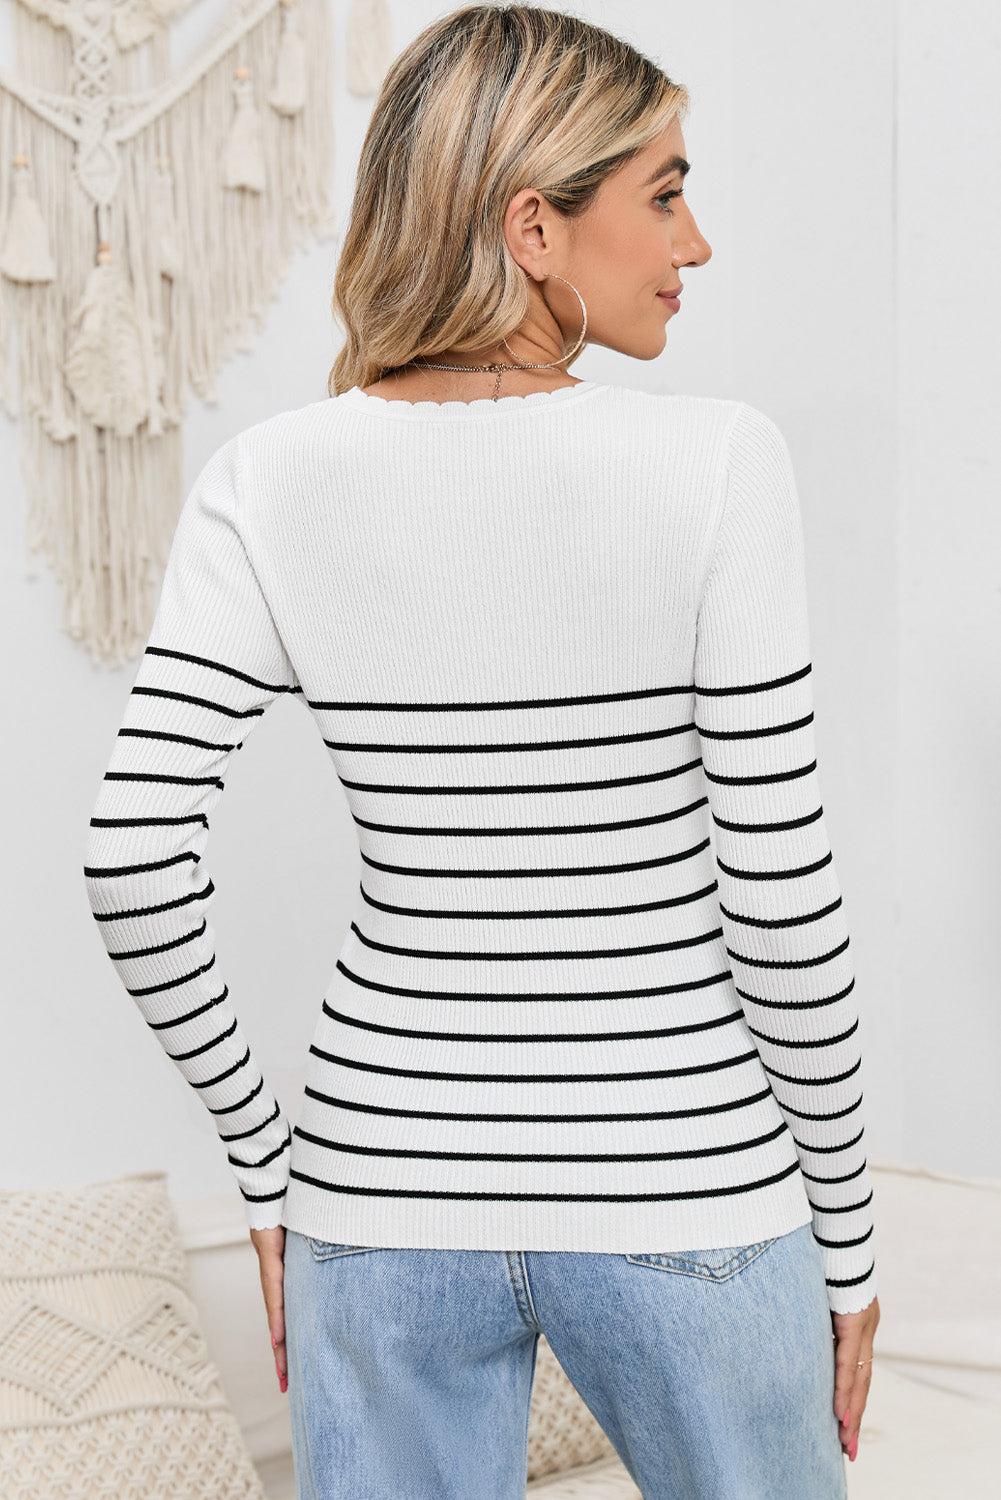 Striped Round Neck Long Sleeve Knit Top - White / S